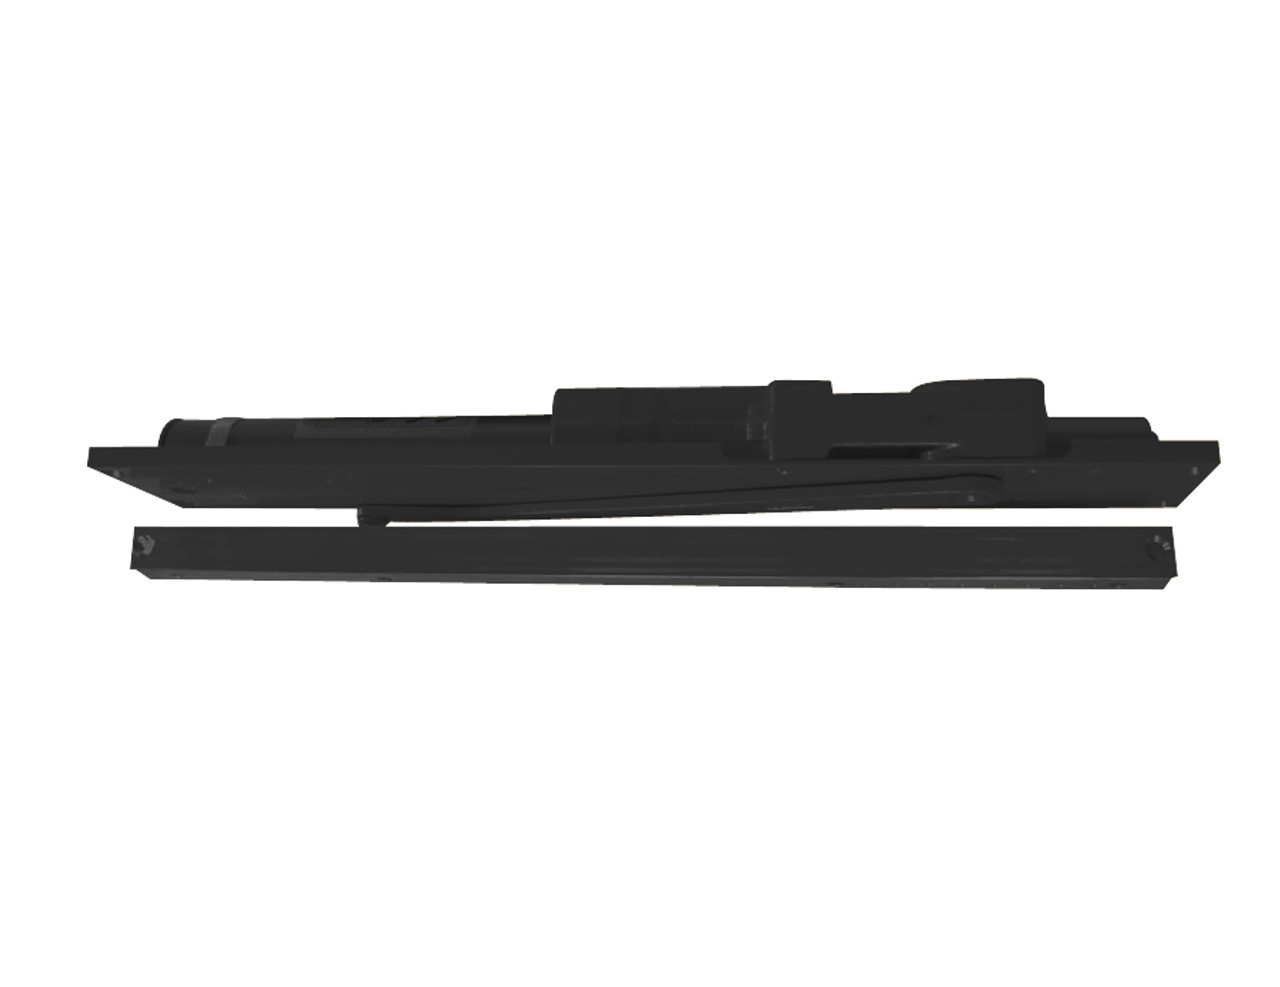 2033-H-LH-BLACK LCN Door Closer with Hold Open Arm in Black Finish